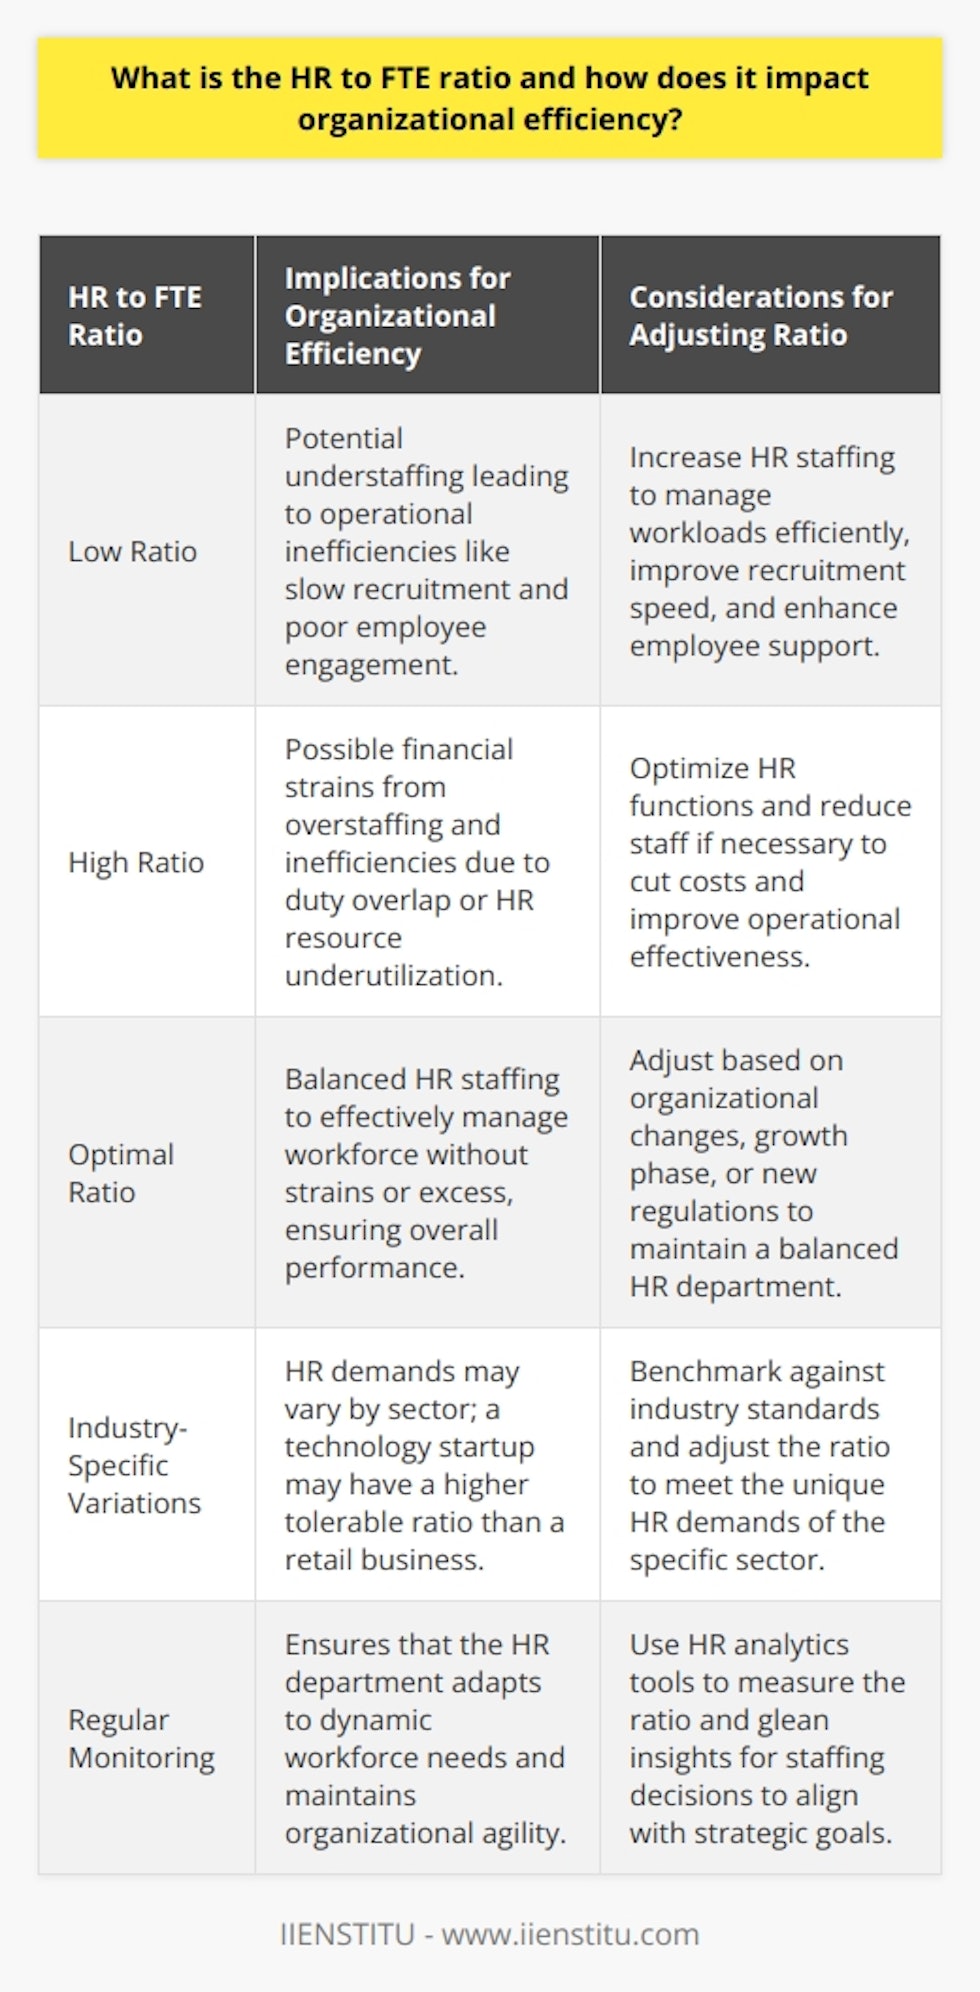 The HR to Full-Time Equivalent (FTE) ratio is an illuminating index for analyzing the scale and operational efficacy of a Human Resources department within an organization. This ratio essentially encapsulates how many HR professionals are employed compared to the total number of full-time equivalent employees within the company. This ratio is not just a number; it reflects the HR department's ability to manage and support the workforce competently.Organizational efficiency is highly influenced by the HR to FTE ratio. A low ratio could signify that the HR department is under-resourced, which can result in a plethora of operational inefficiencies, such as slow recruitment processes, subpar employee engagement, and inefficacious management of employee benefits and compliance issues. These challenges could culminate in decreased overall organizational performance and could also affect employee morale adversely.On the other aspect, a very high HR to FTE ratio might suggest that an HR department is overly staffed. While this might imply that employees have abundant support, it can also lead to unnecessary financial strains as a result of surplus staffing. Furthermore, an excessively high ratio can cause overlap of duties or underutilization of HR staff resources, which again, is not an economically sound position for the organization.The sweet spot for an HR to FTE ratio preserves a balance where the human resource department is adequately staffed to perform its functions without strains or excess. This sweet spot is not a one-size-fits-all figure, but will vary based on specific organizational factors such as the industry sector, the complexity of HR requirements, employee dynamics, and the strategic role of HR in the organization. A technology startup, for instance, might tolerate a higher HR to FTE ratio compared to a retail business due to the different demands of talent acquisition and management in these sectors.Regular monitoring of the HR to FTE ratio is vital for maintaining organizational agility. For example, if an organization is in its growth phase, the ratio would need to be reassessed to align with the expanding workforce. Similarly, new regulations may necessitate a change in HR staffing to ensure compliance without overburdening the current staff.In practice, organizations can utilize benchmarking against similar companies or draw on industry-wide data to determine their current HR to FTE ratios and understand where adjustments may be necessary to enhance efficiency. Contemporary HR analytics tools, such as those provided by institutions like IIENSTITU, can help in accurately measuring this ratio and supplying the actionable insights needed for making informed staffing decisions.In sum, maintaining an appropriate HR to FTE ratio is a balancing act that has a direct bearing on an organization’s effectiveness and its HR department's operational capacity. It is a strategic lever that, when used judiciously, can ensure the HR department contributes positively to an organization's success and health. Organizations should regularly revisit this ratio to maintain alignment with their strategic goals, workforce needs, and industry best practices.